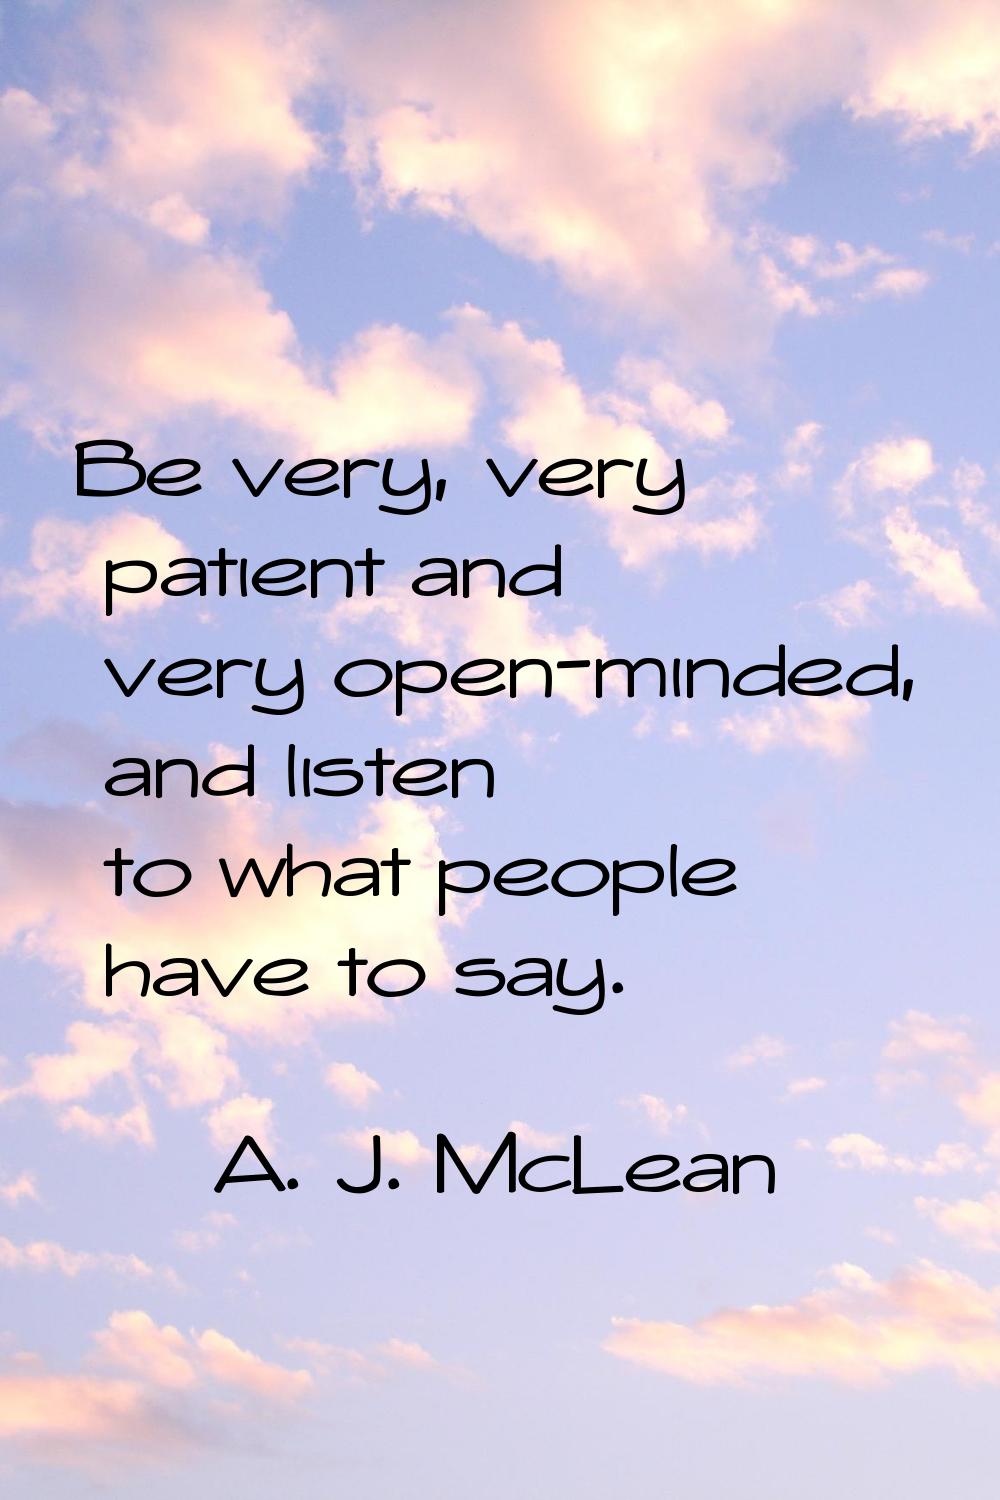 Be very, very patient and very open-minded, and listen to what people have to say.